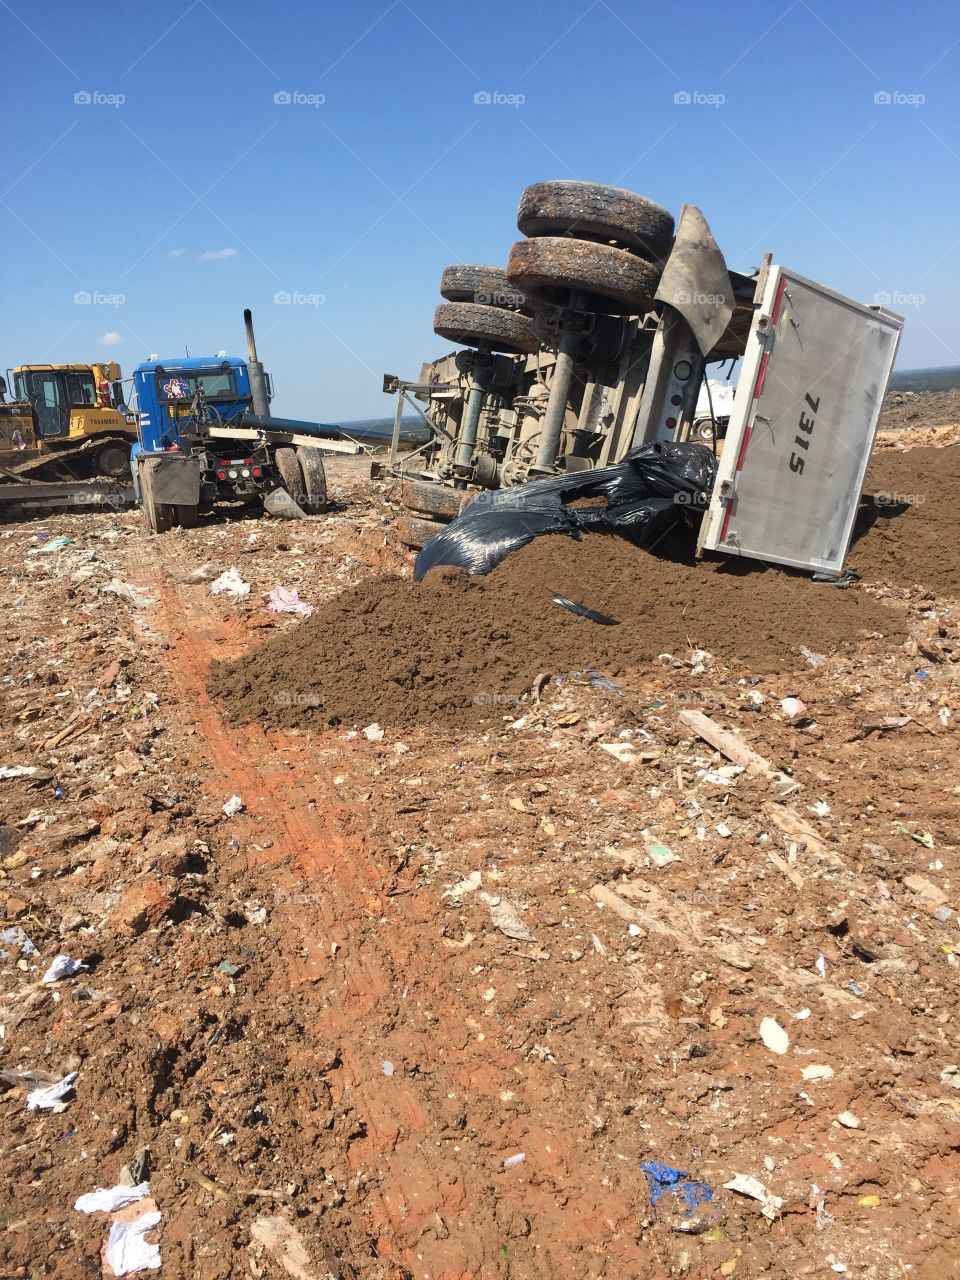 Republic Services tractor trailer with a roll over in the McCarty Landfill